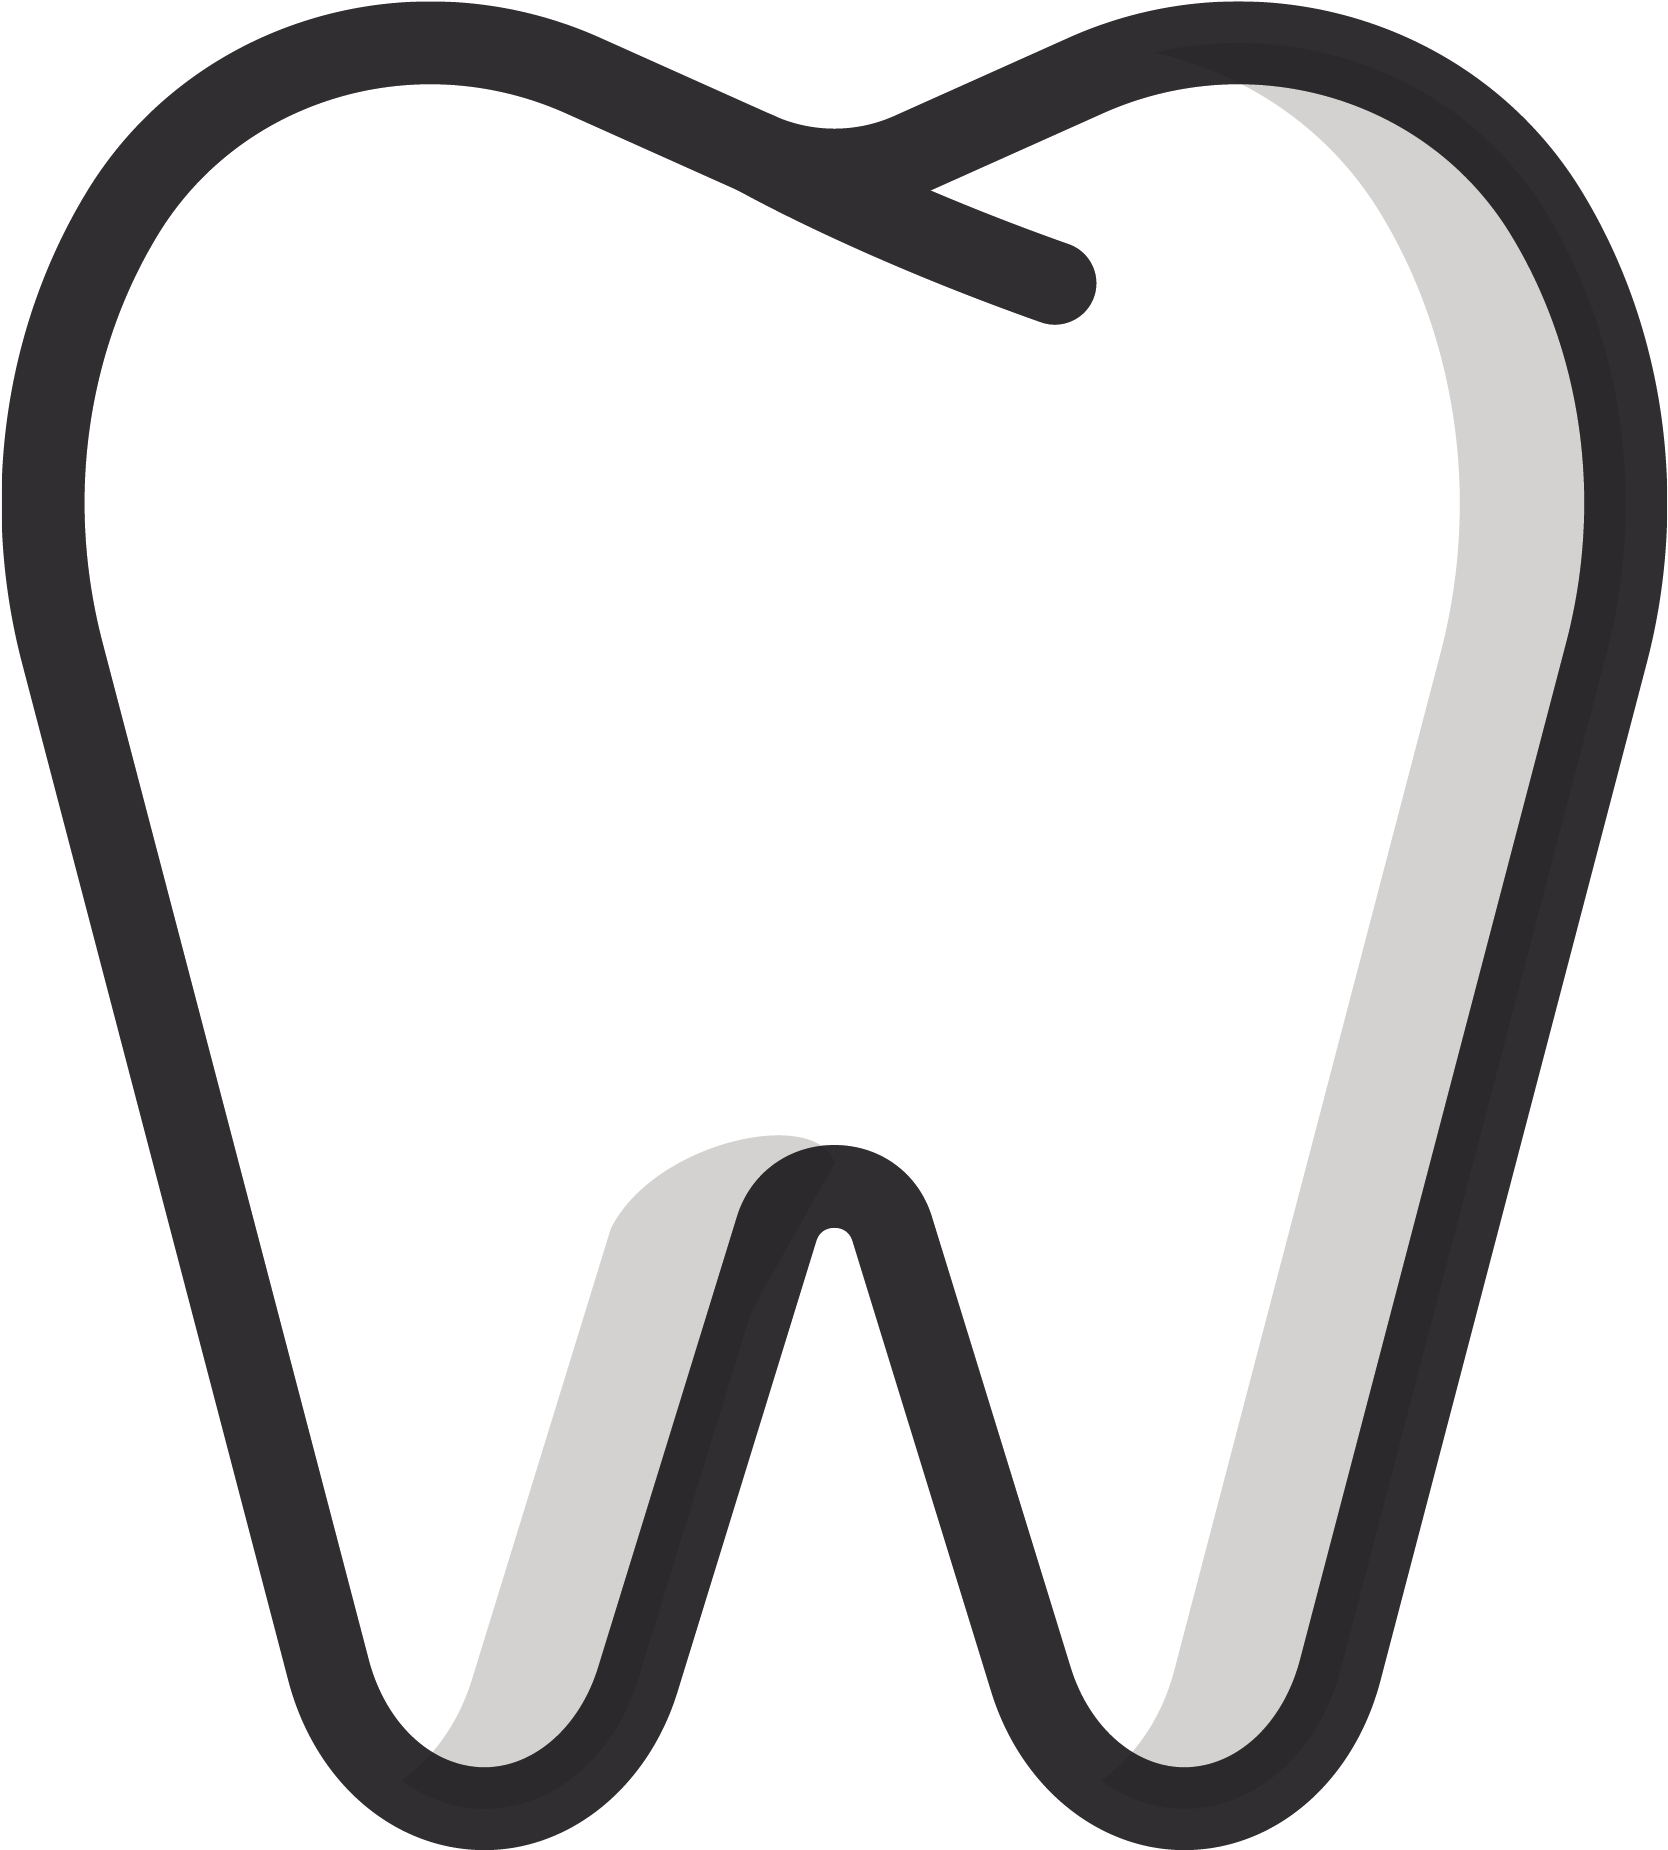 White Tooth HD Image Free PNG Image